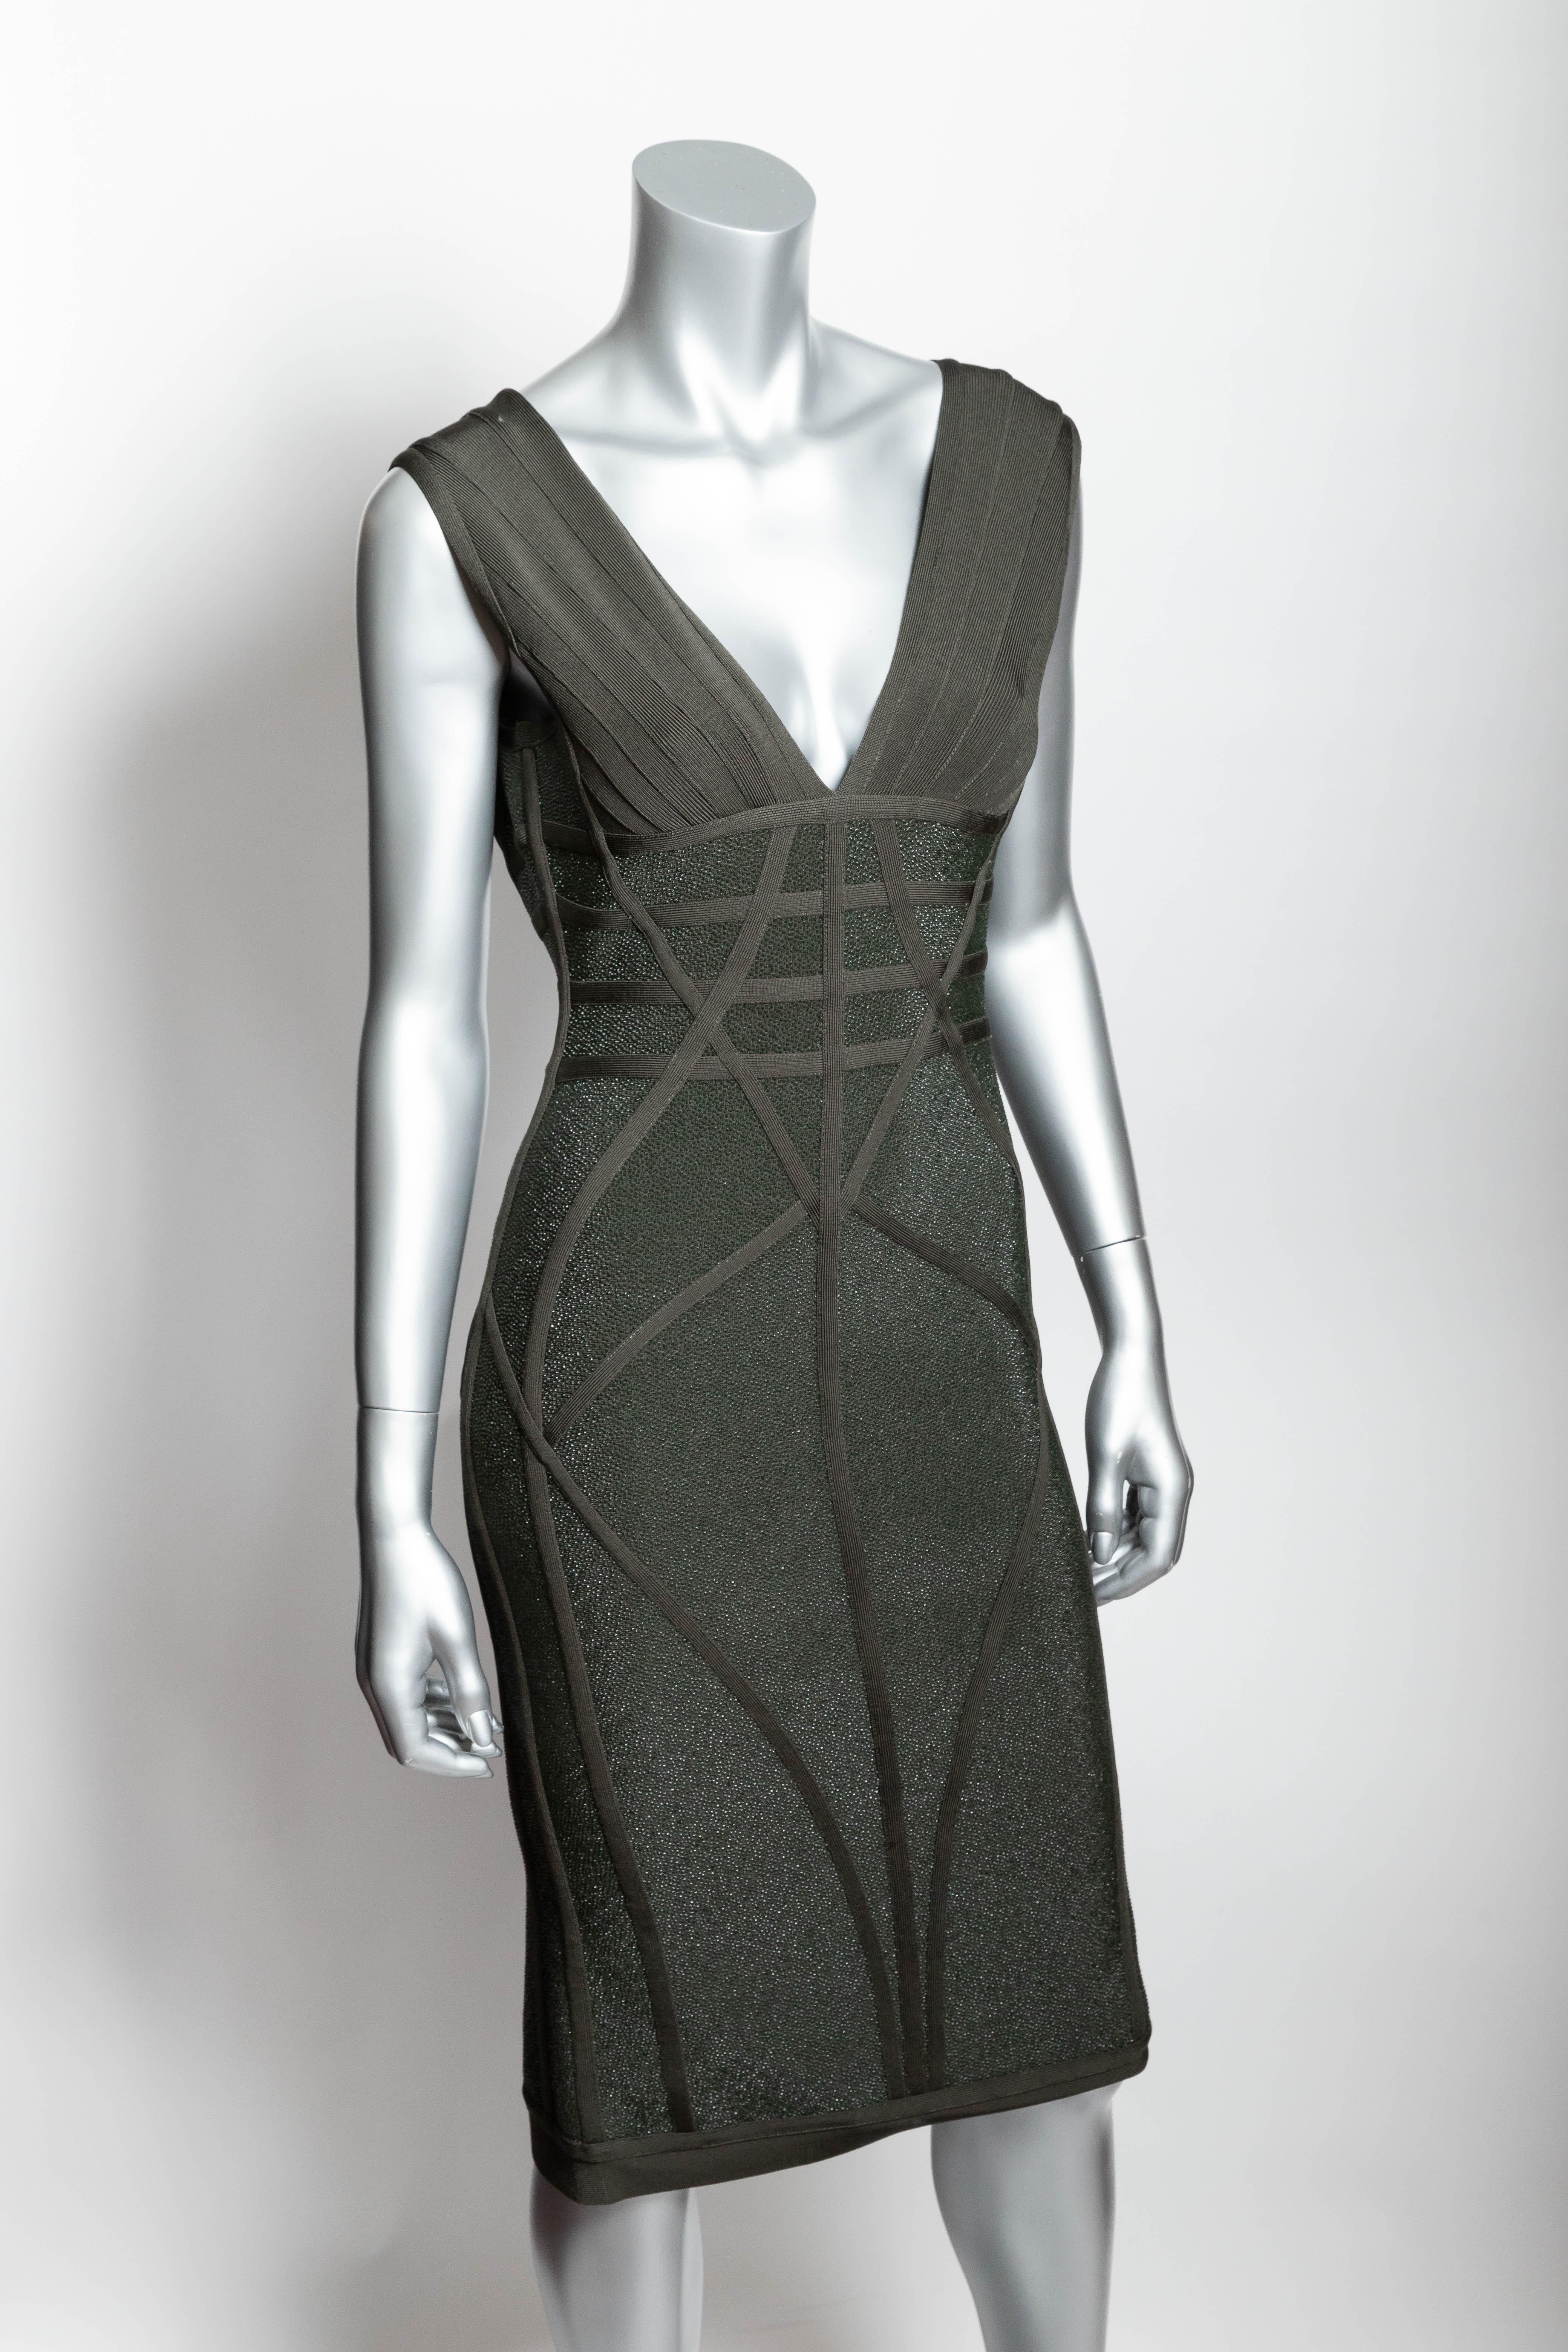 Very unusual and incredibly chic Herve Leger dress in a dark green shagreen like fabric.
This is the most forgiving Herve Leger dress that we have ever sold.
Back zipper  / zipper can zip up from the hem as well as zip down from the